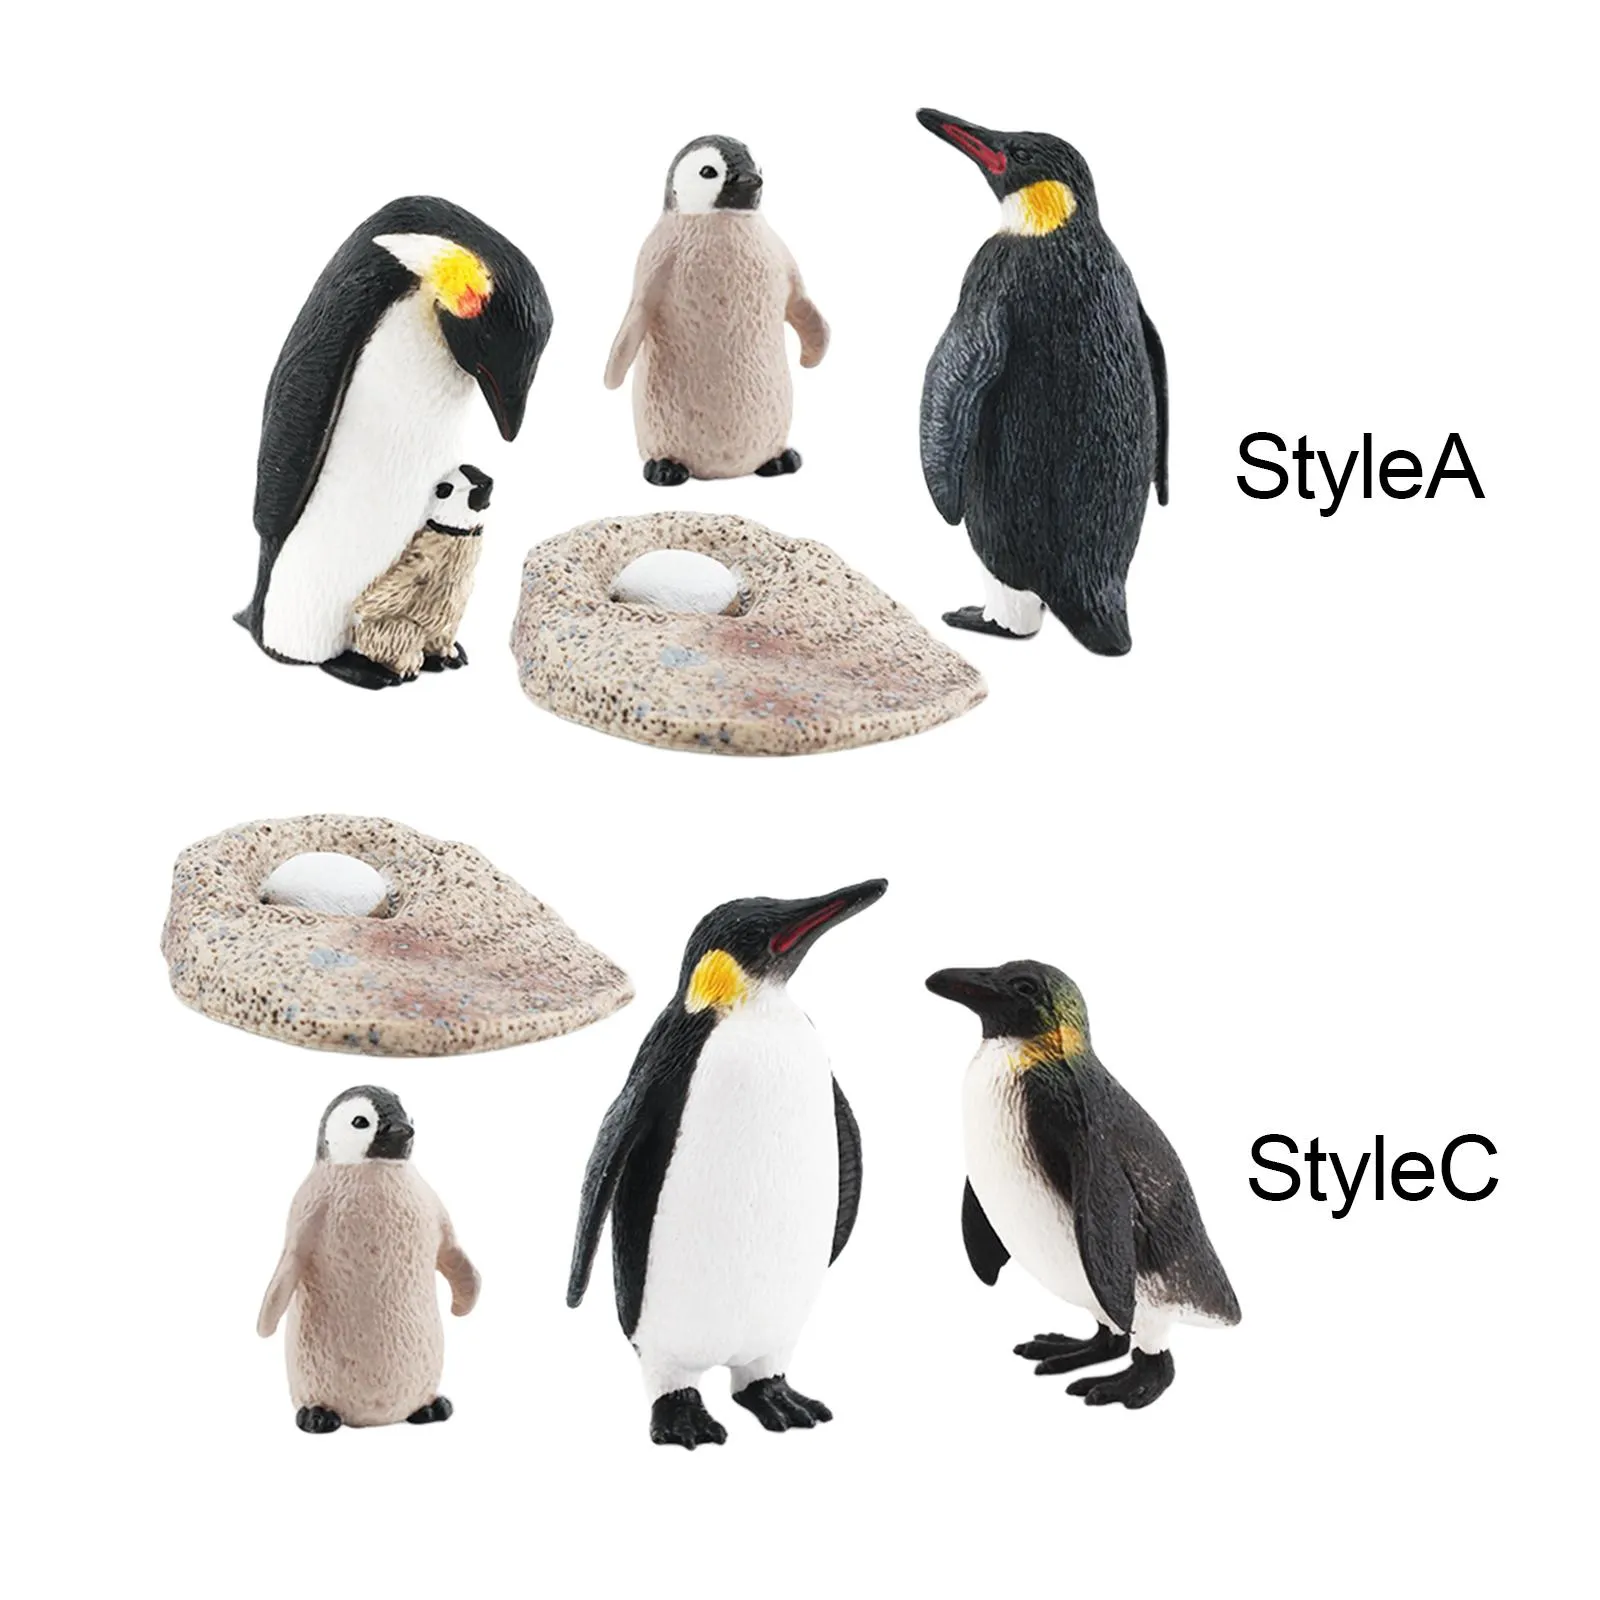 Penguin Growth Cycle Toys Animal Life Cycle Model Animal Figures Role Play